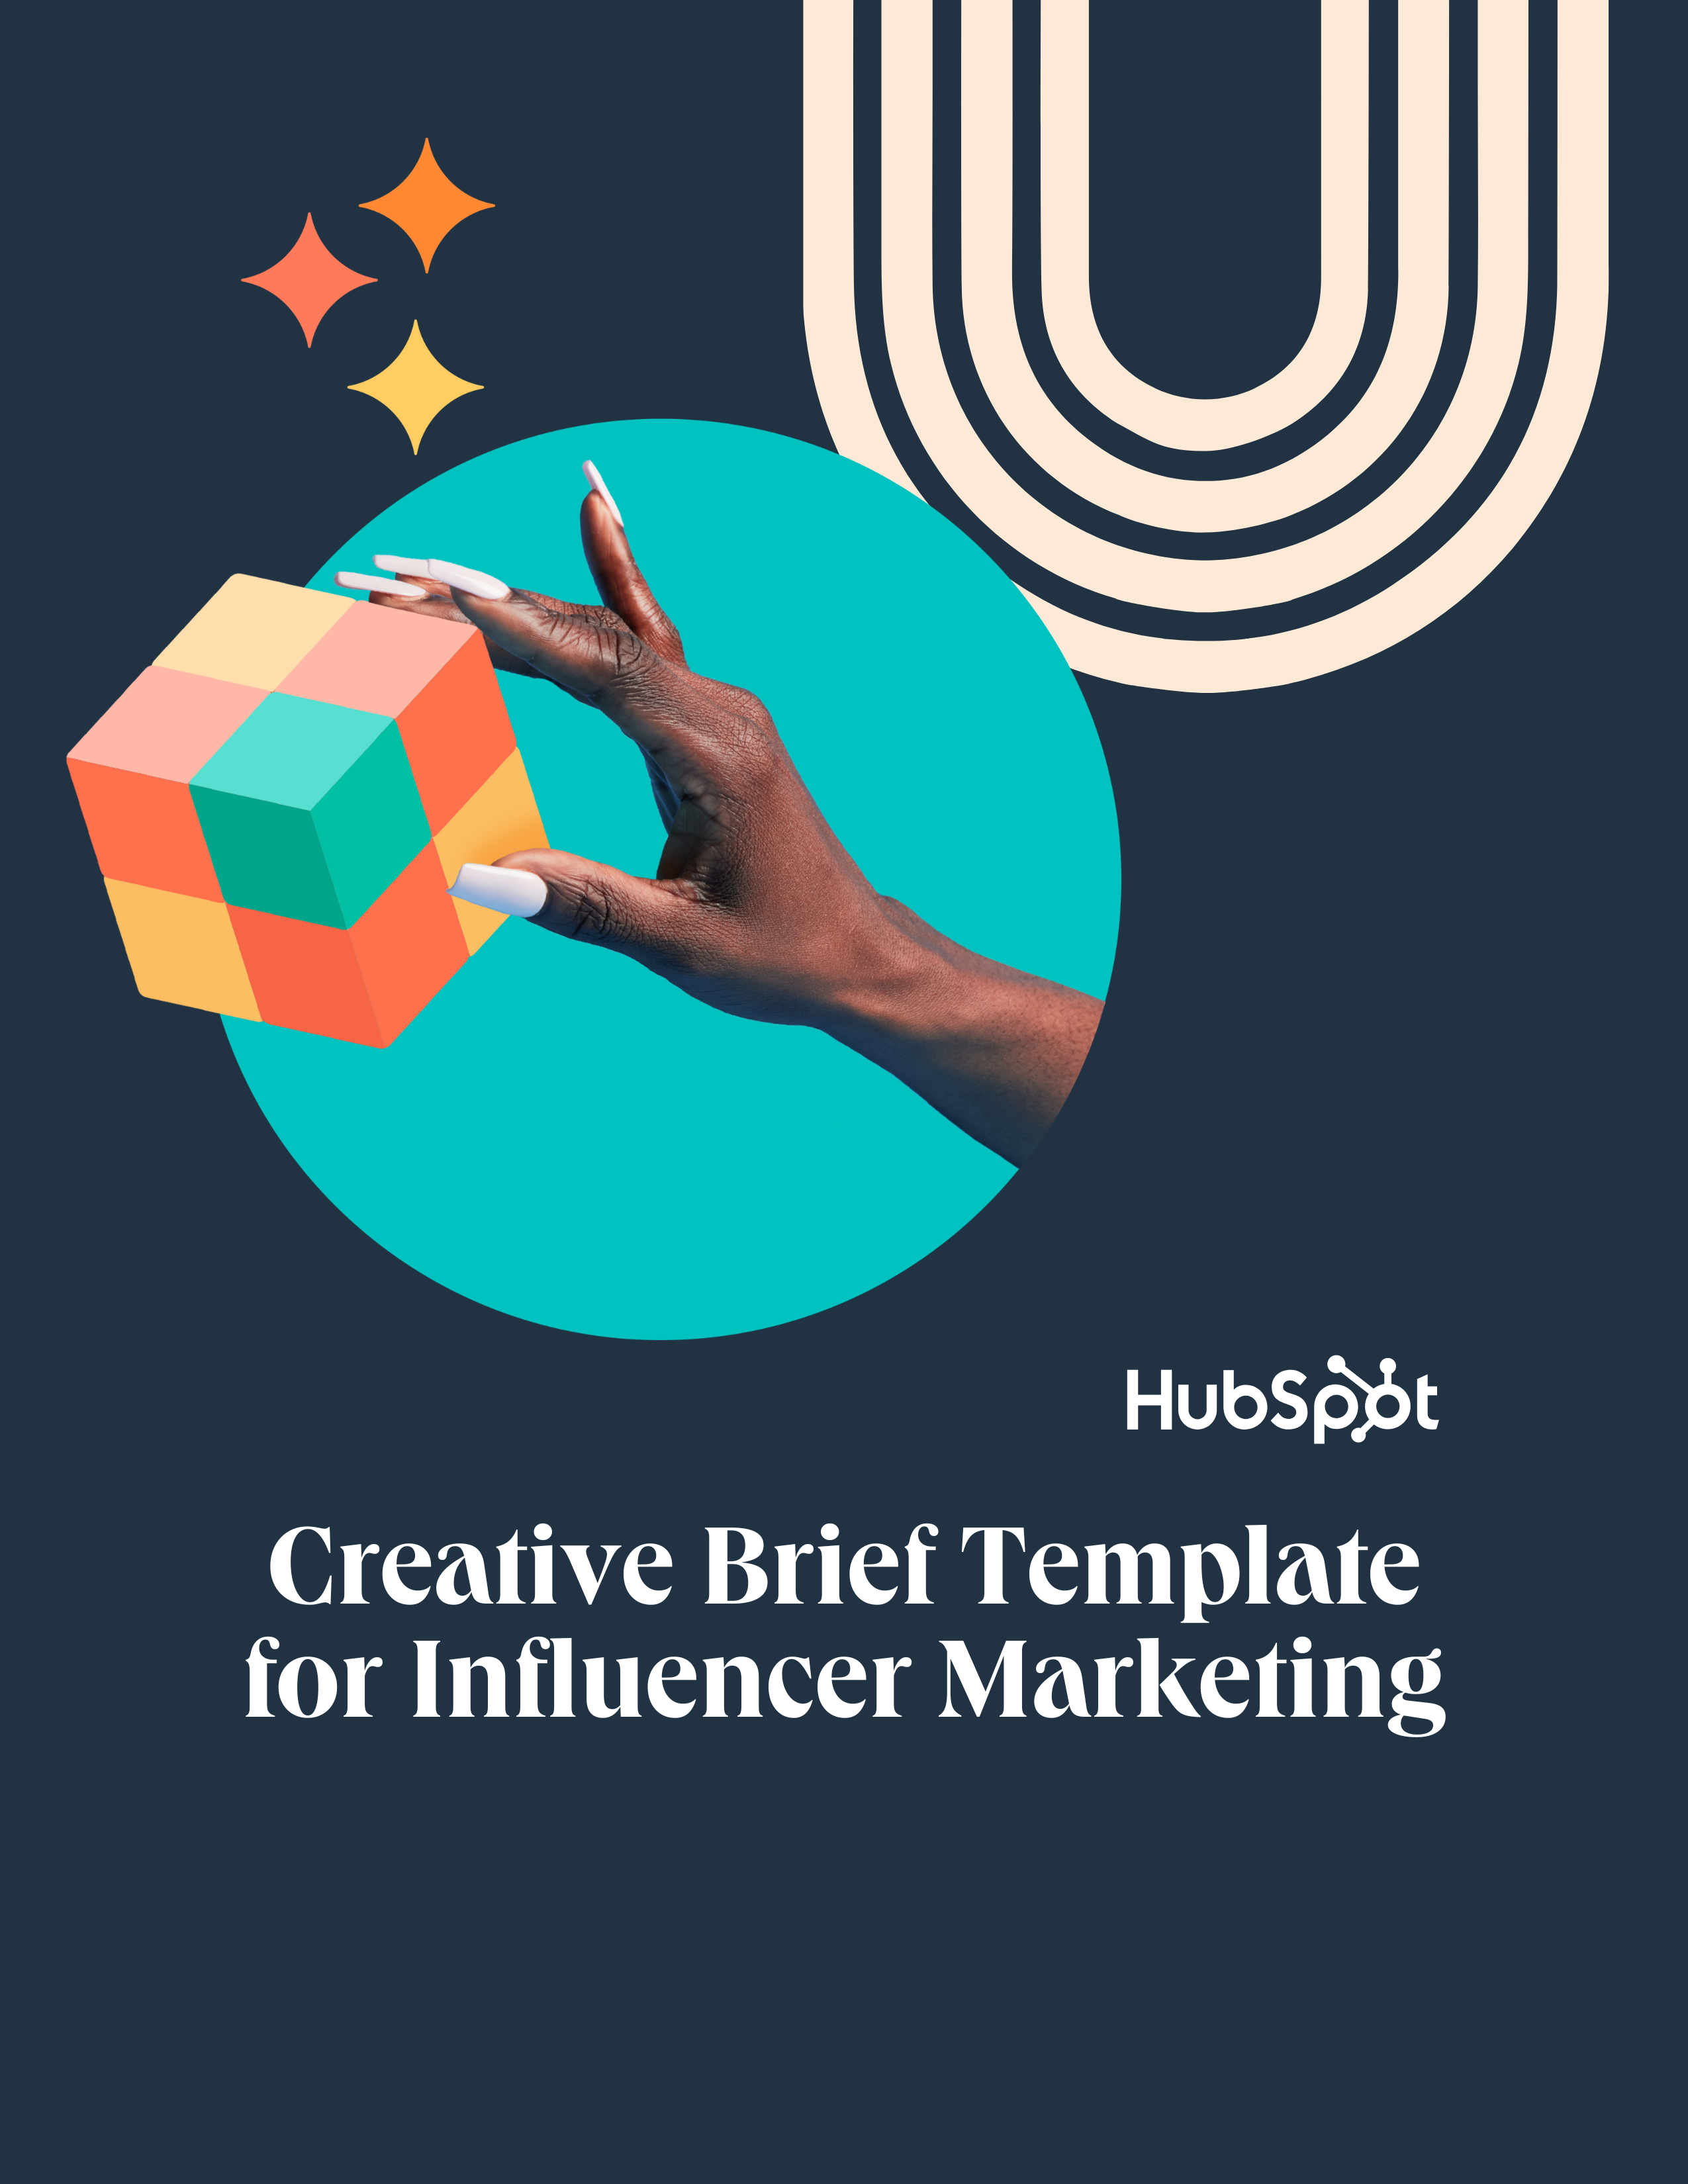 ebook cover -creative brief template for influencer marketing